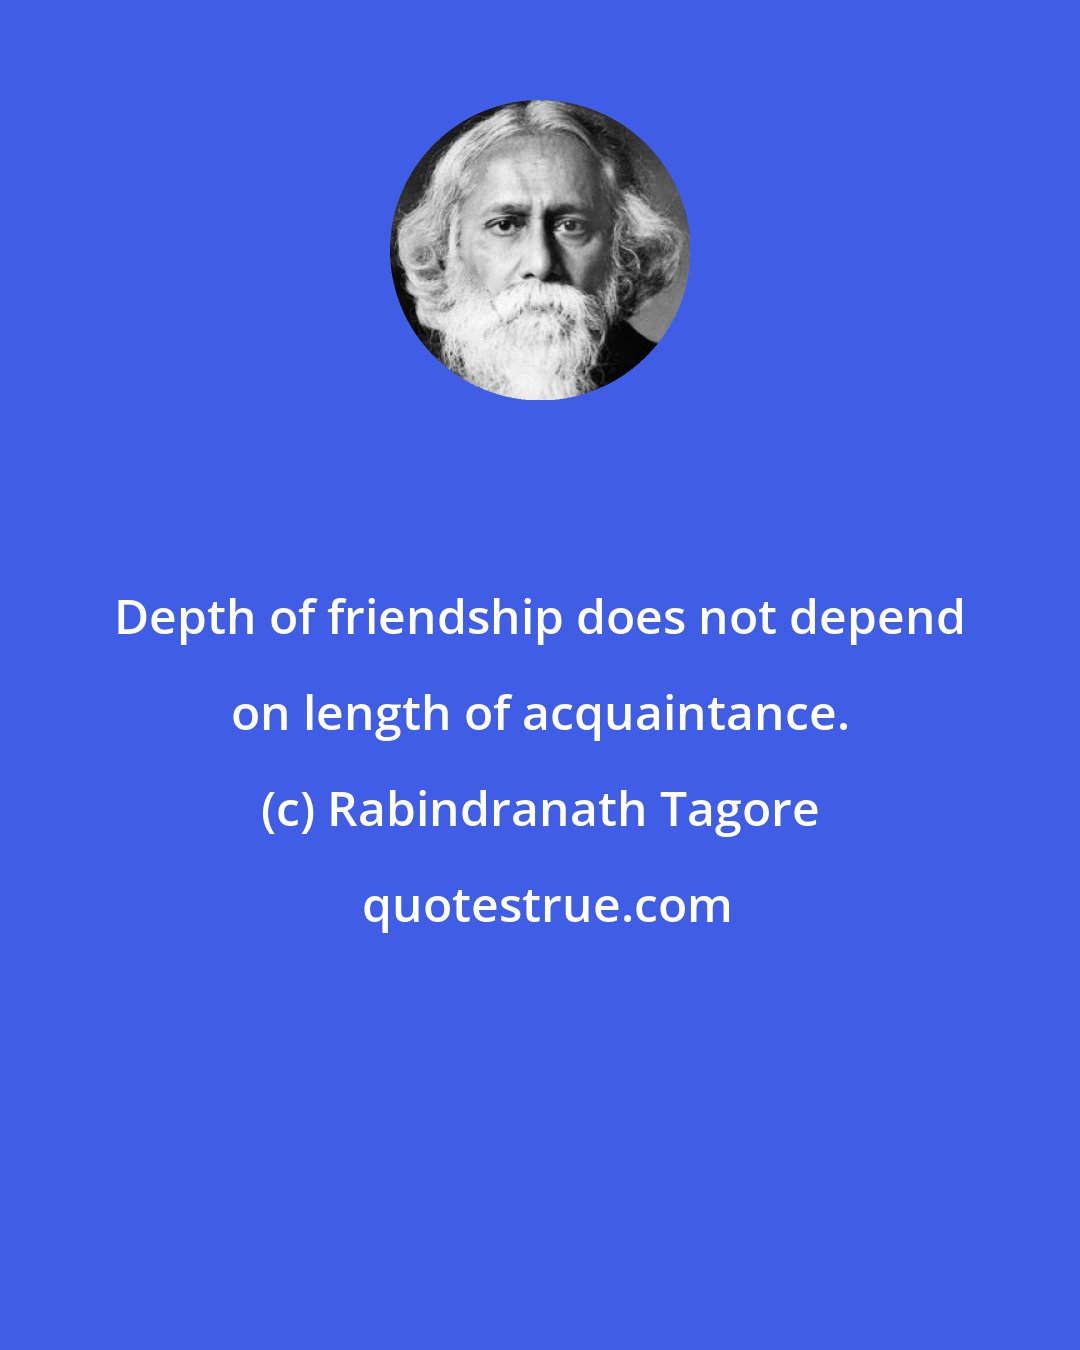 Rabindranath Tagore: Depth of friendship does not depend on length of acquaintance.